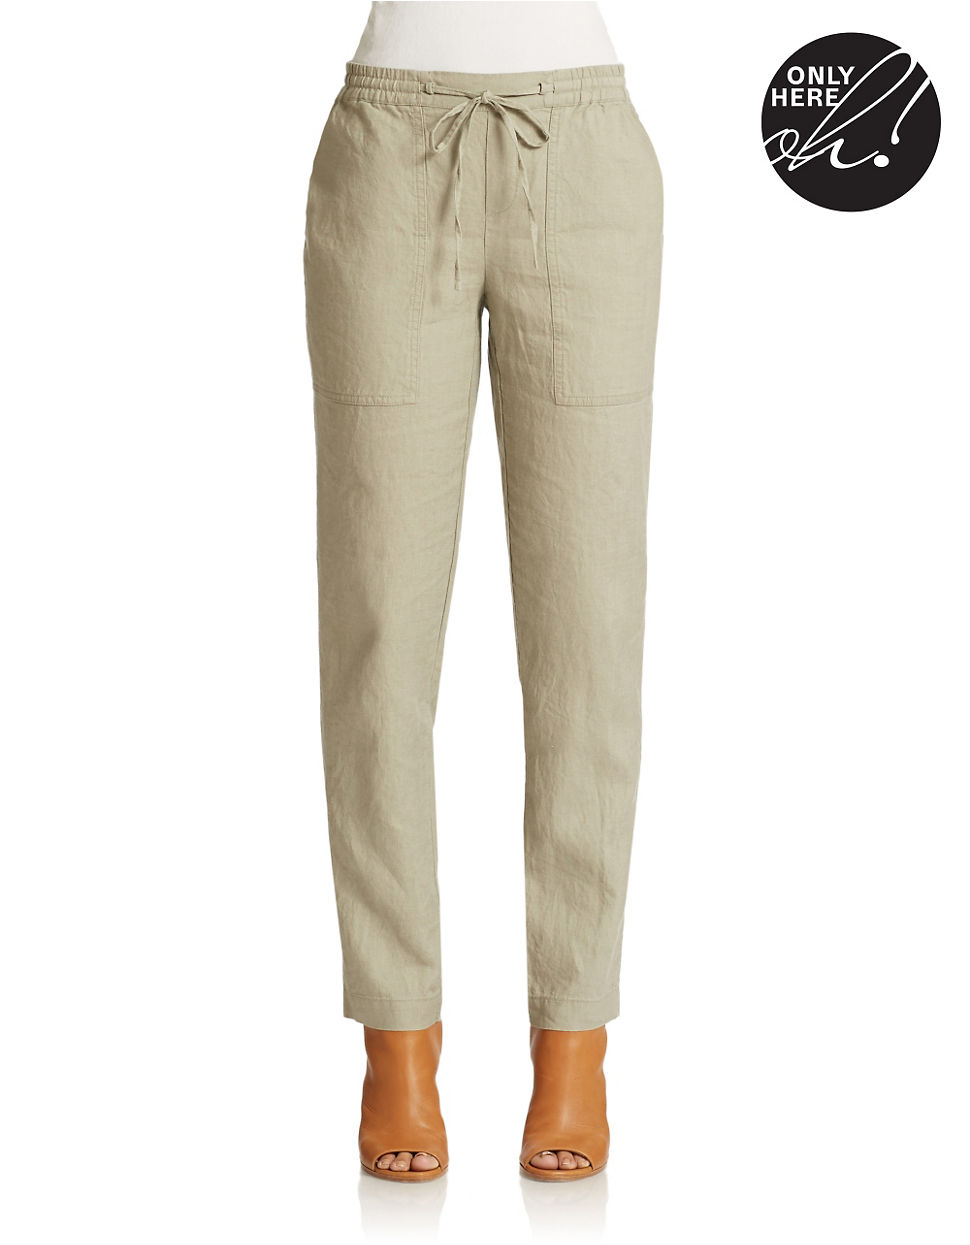 Lord & taylor Plus Linen Drawstring Pants in Beige (Cavalry Green) | Lyst